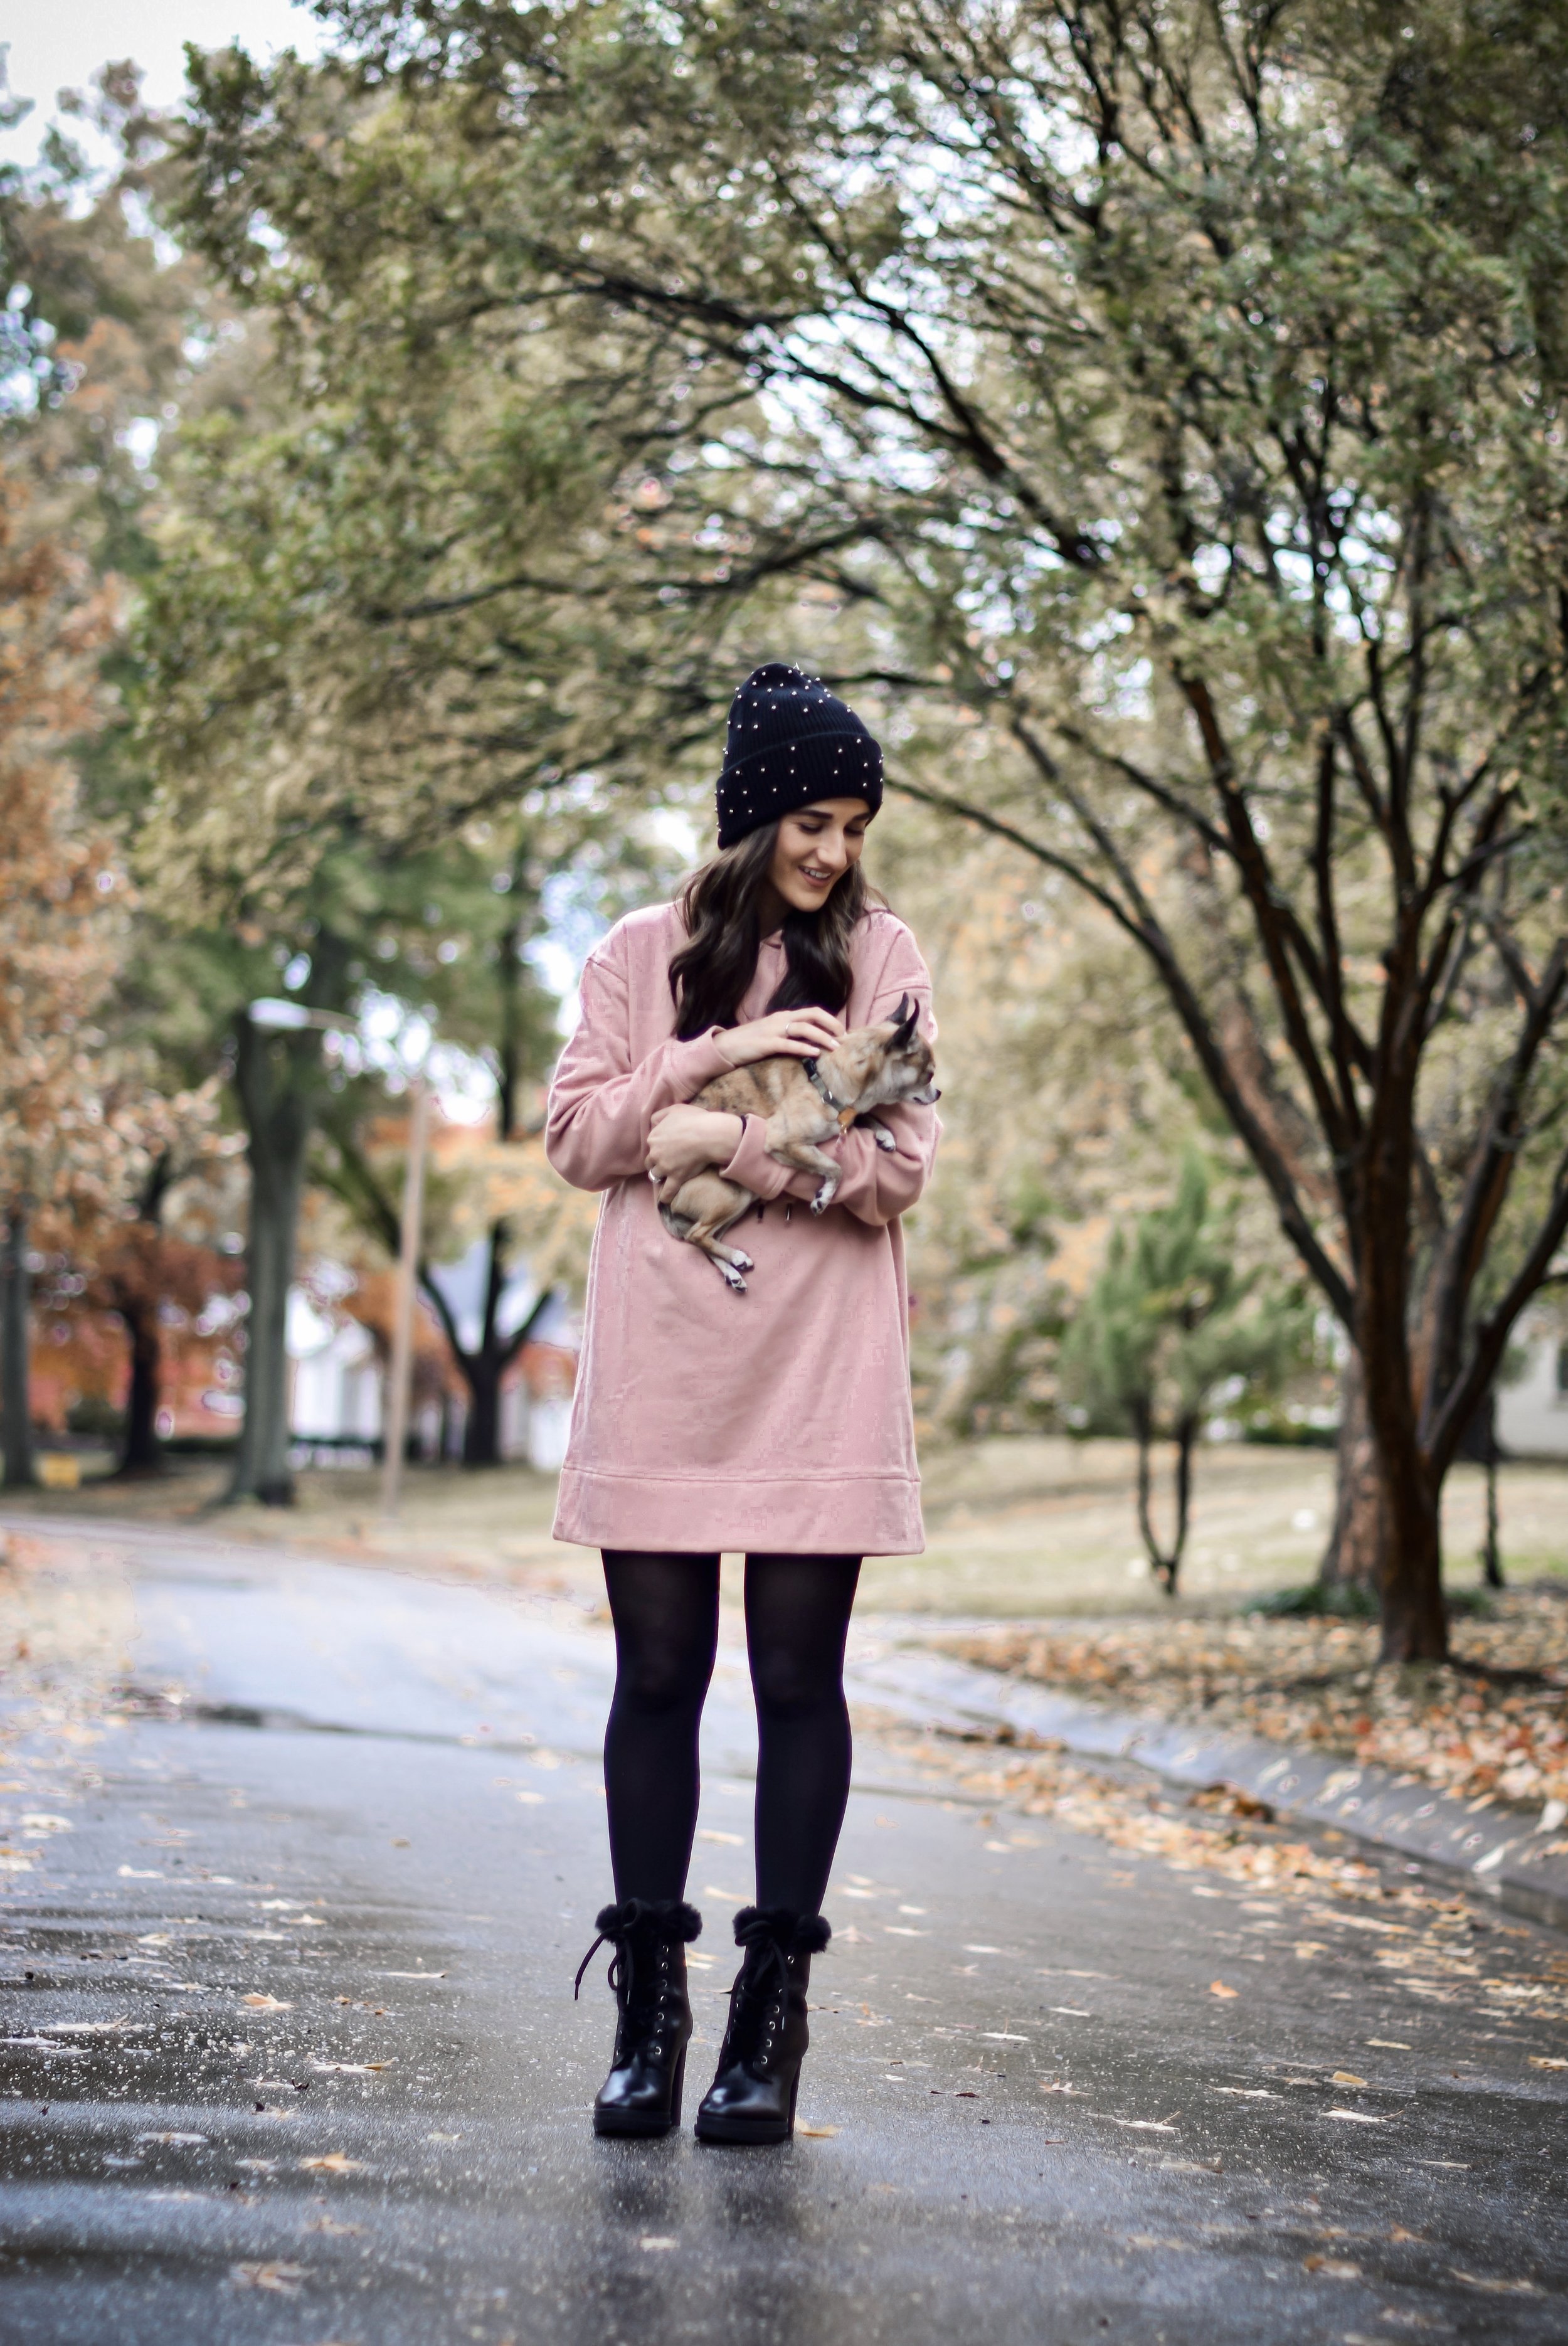 Getting Winter Ready With Macy's Esther Santer Fashion Blog NYC Street Style Blogger Outfit OOTD Trendy Chihuahua Pink Sweatshirt Dress Black Beanie Black Fur Booties Boots Shoes Fall  Winter Outfit Tights Beautiful H&M Shop Cute Puppy Dog Inspiration.jpg